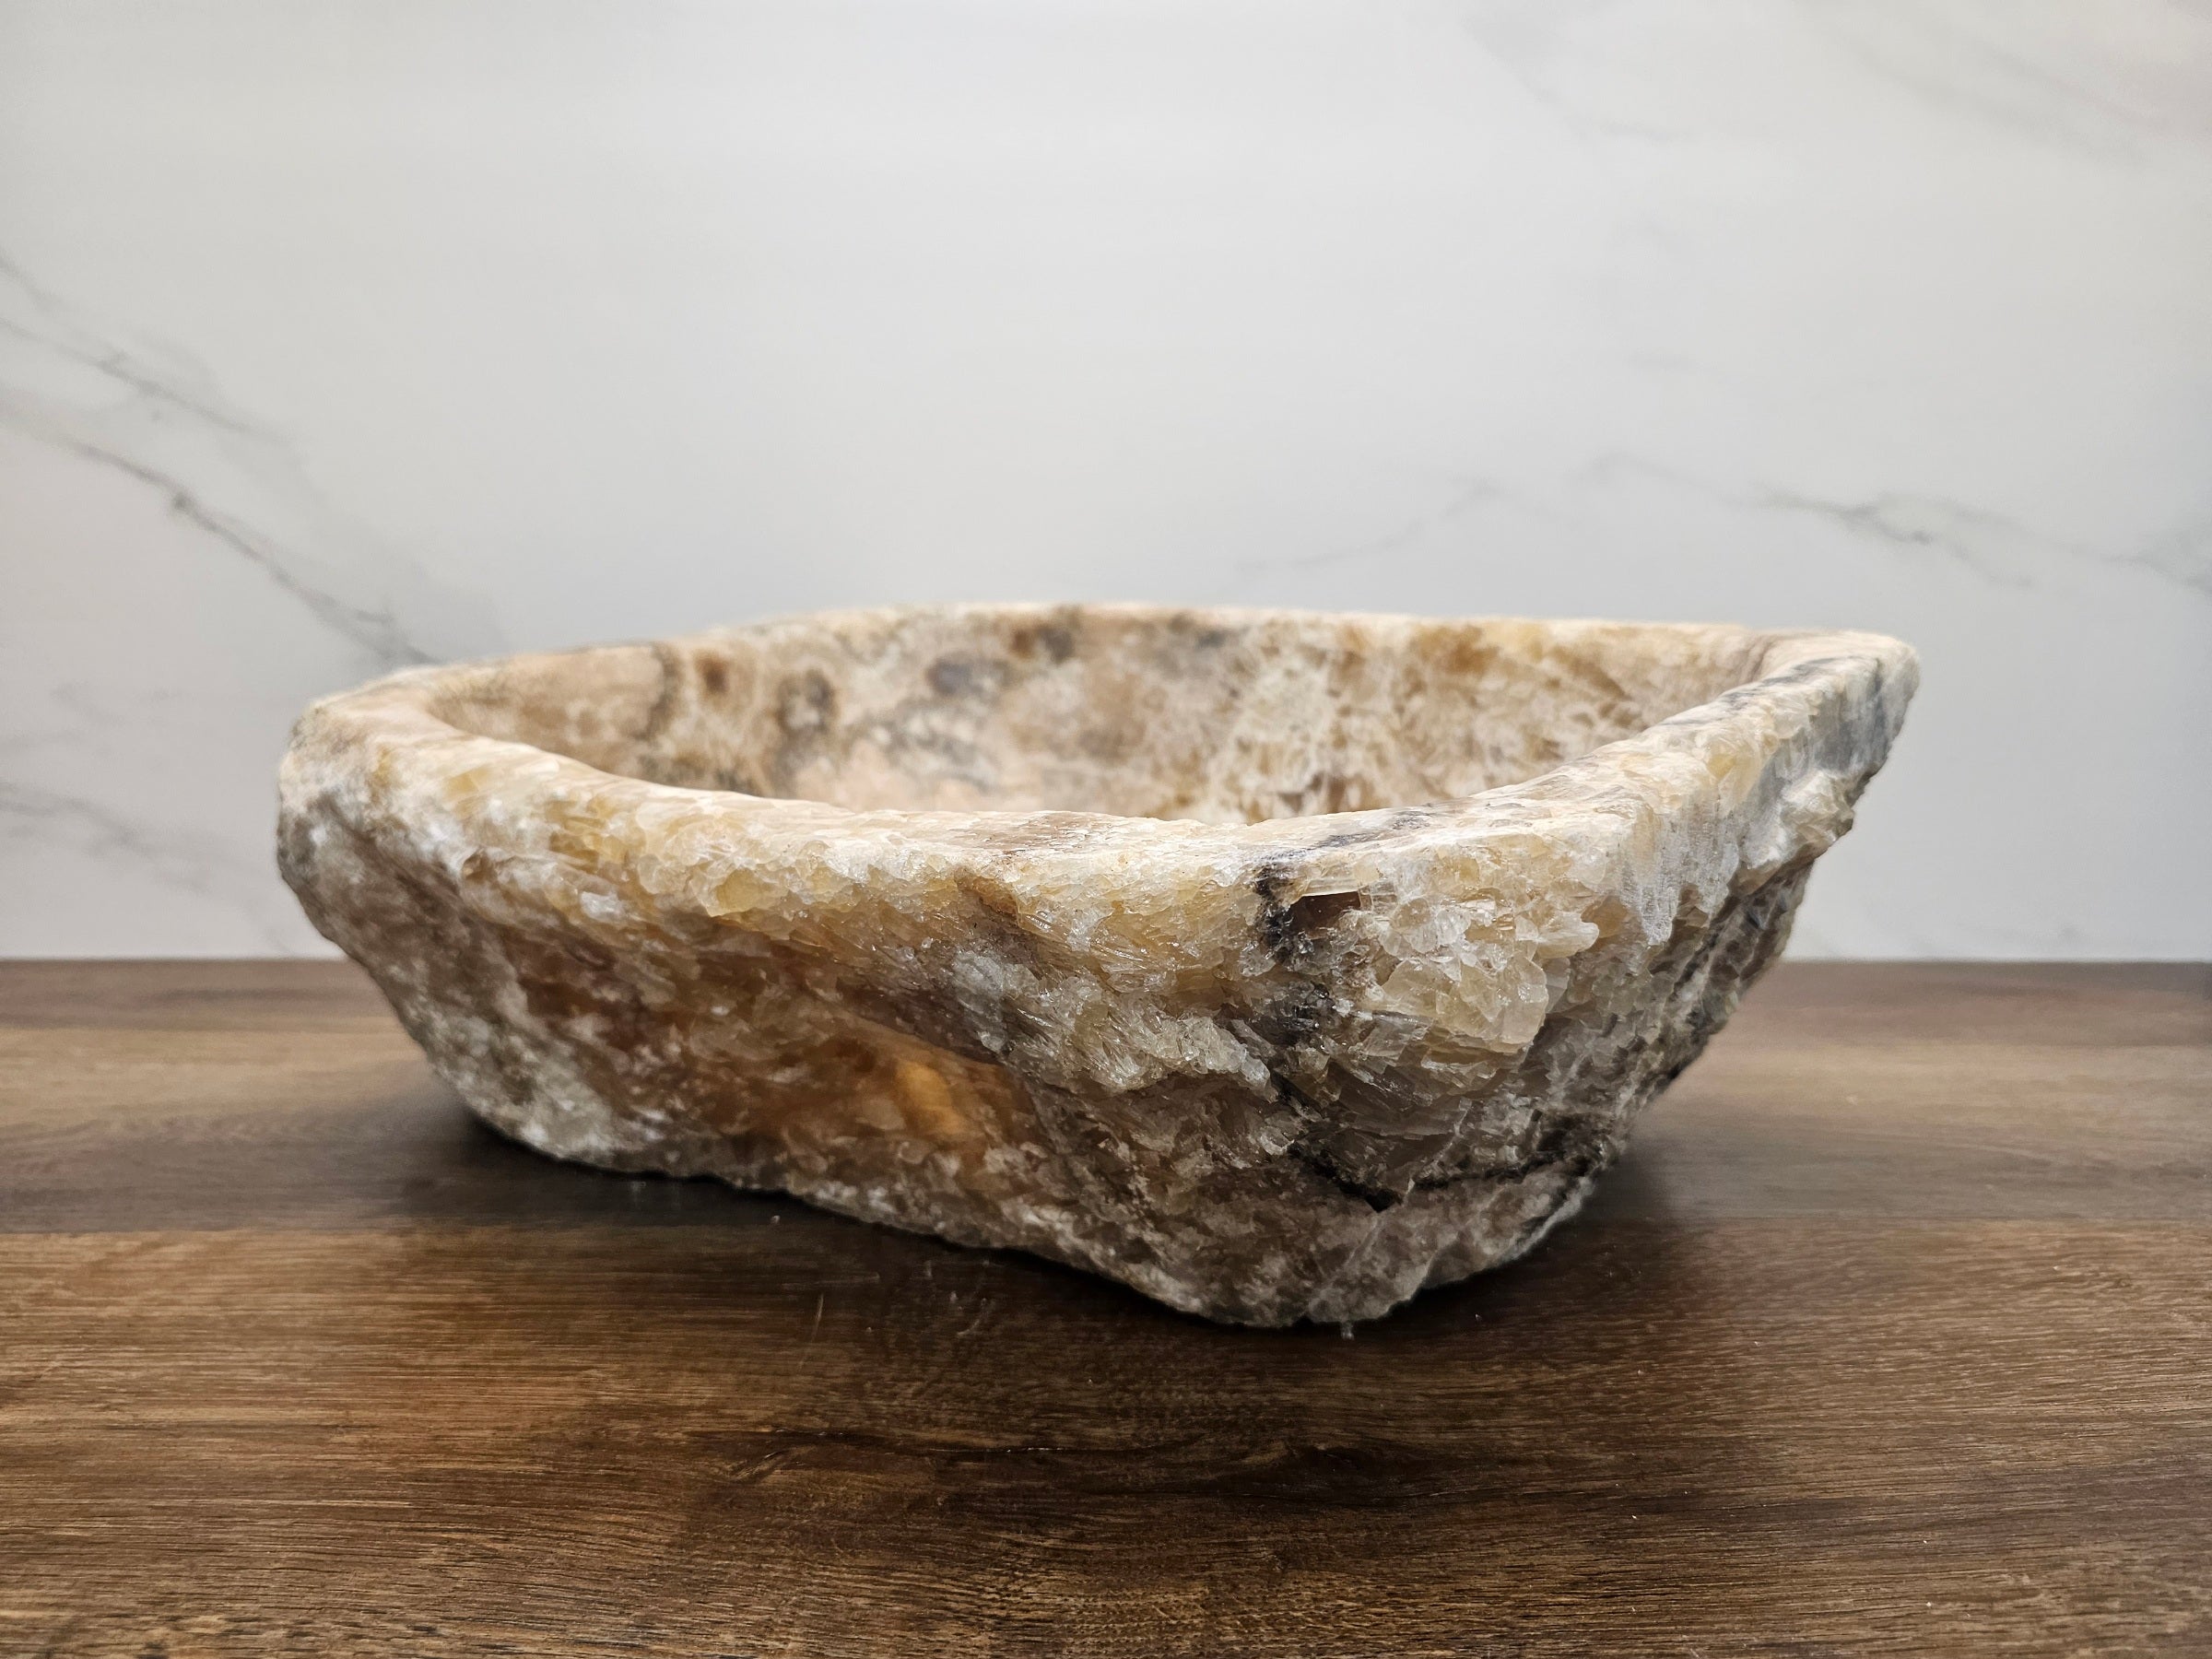 Brown and Tan Onyx Stone  Bathroom Vessel Sink. Epoxy Sealant is available with fast shipping. Standard drain size. A beautiful work of rustic art. Handmade. Buy Now at www.felipeandgrace.com.